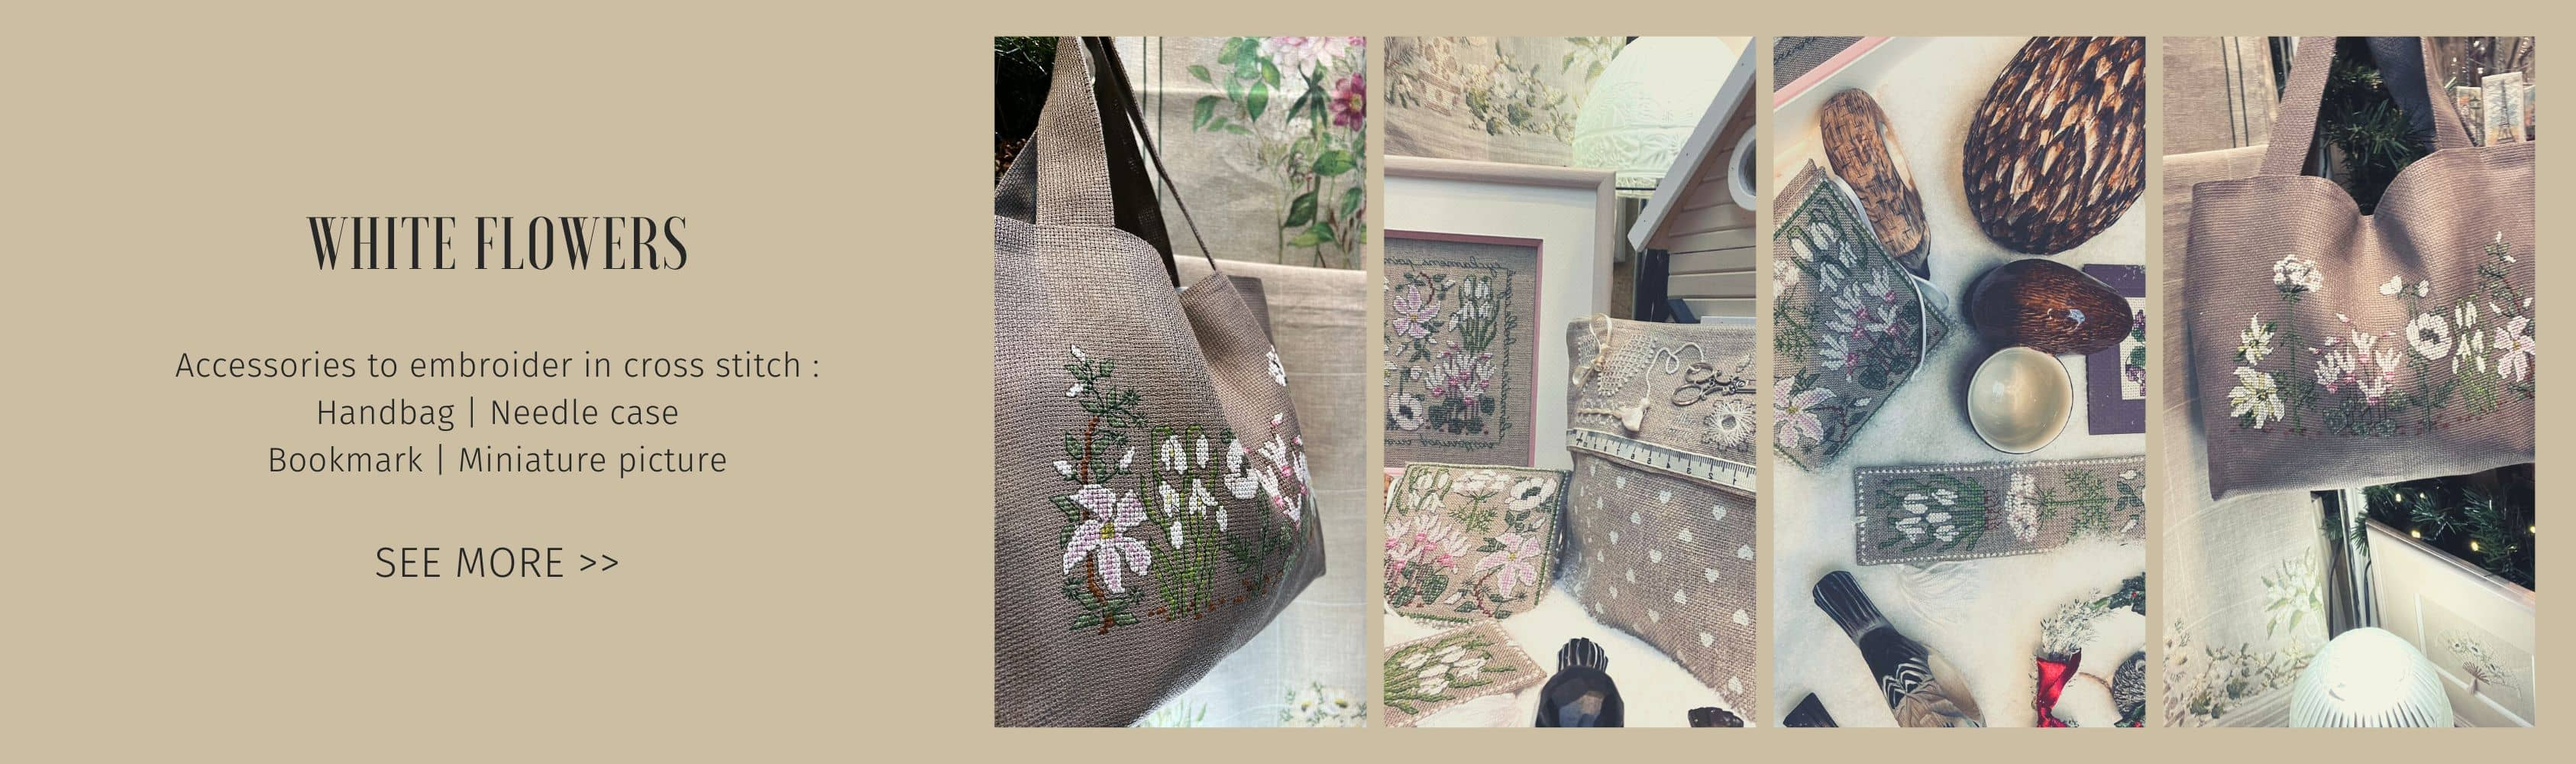 New patterns to embroider in cross stitch - White Flowers. Accessories: bag, needle case, bookmark, miniature square picture